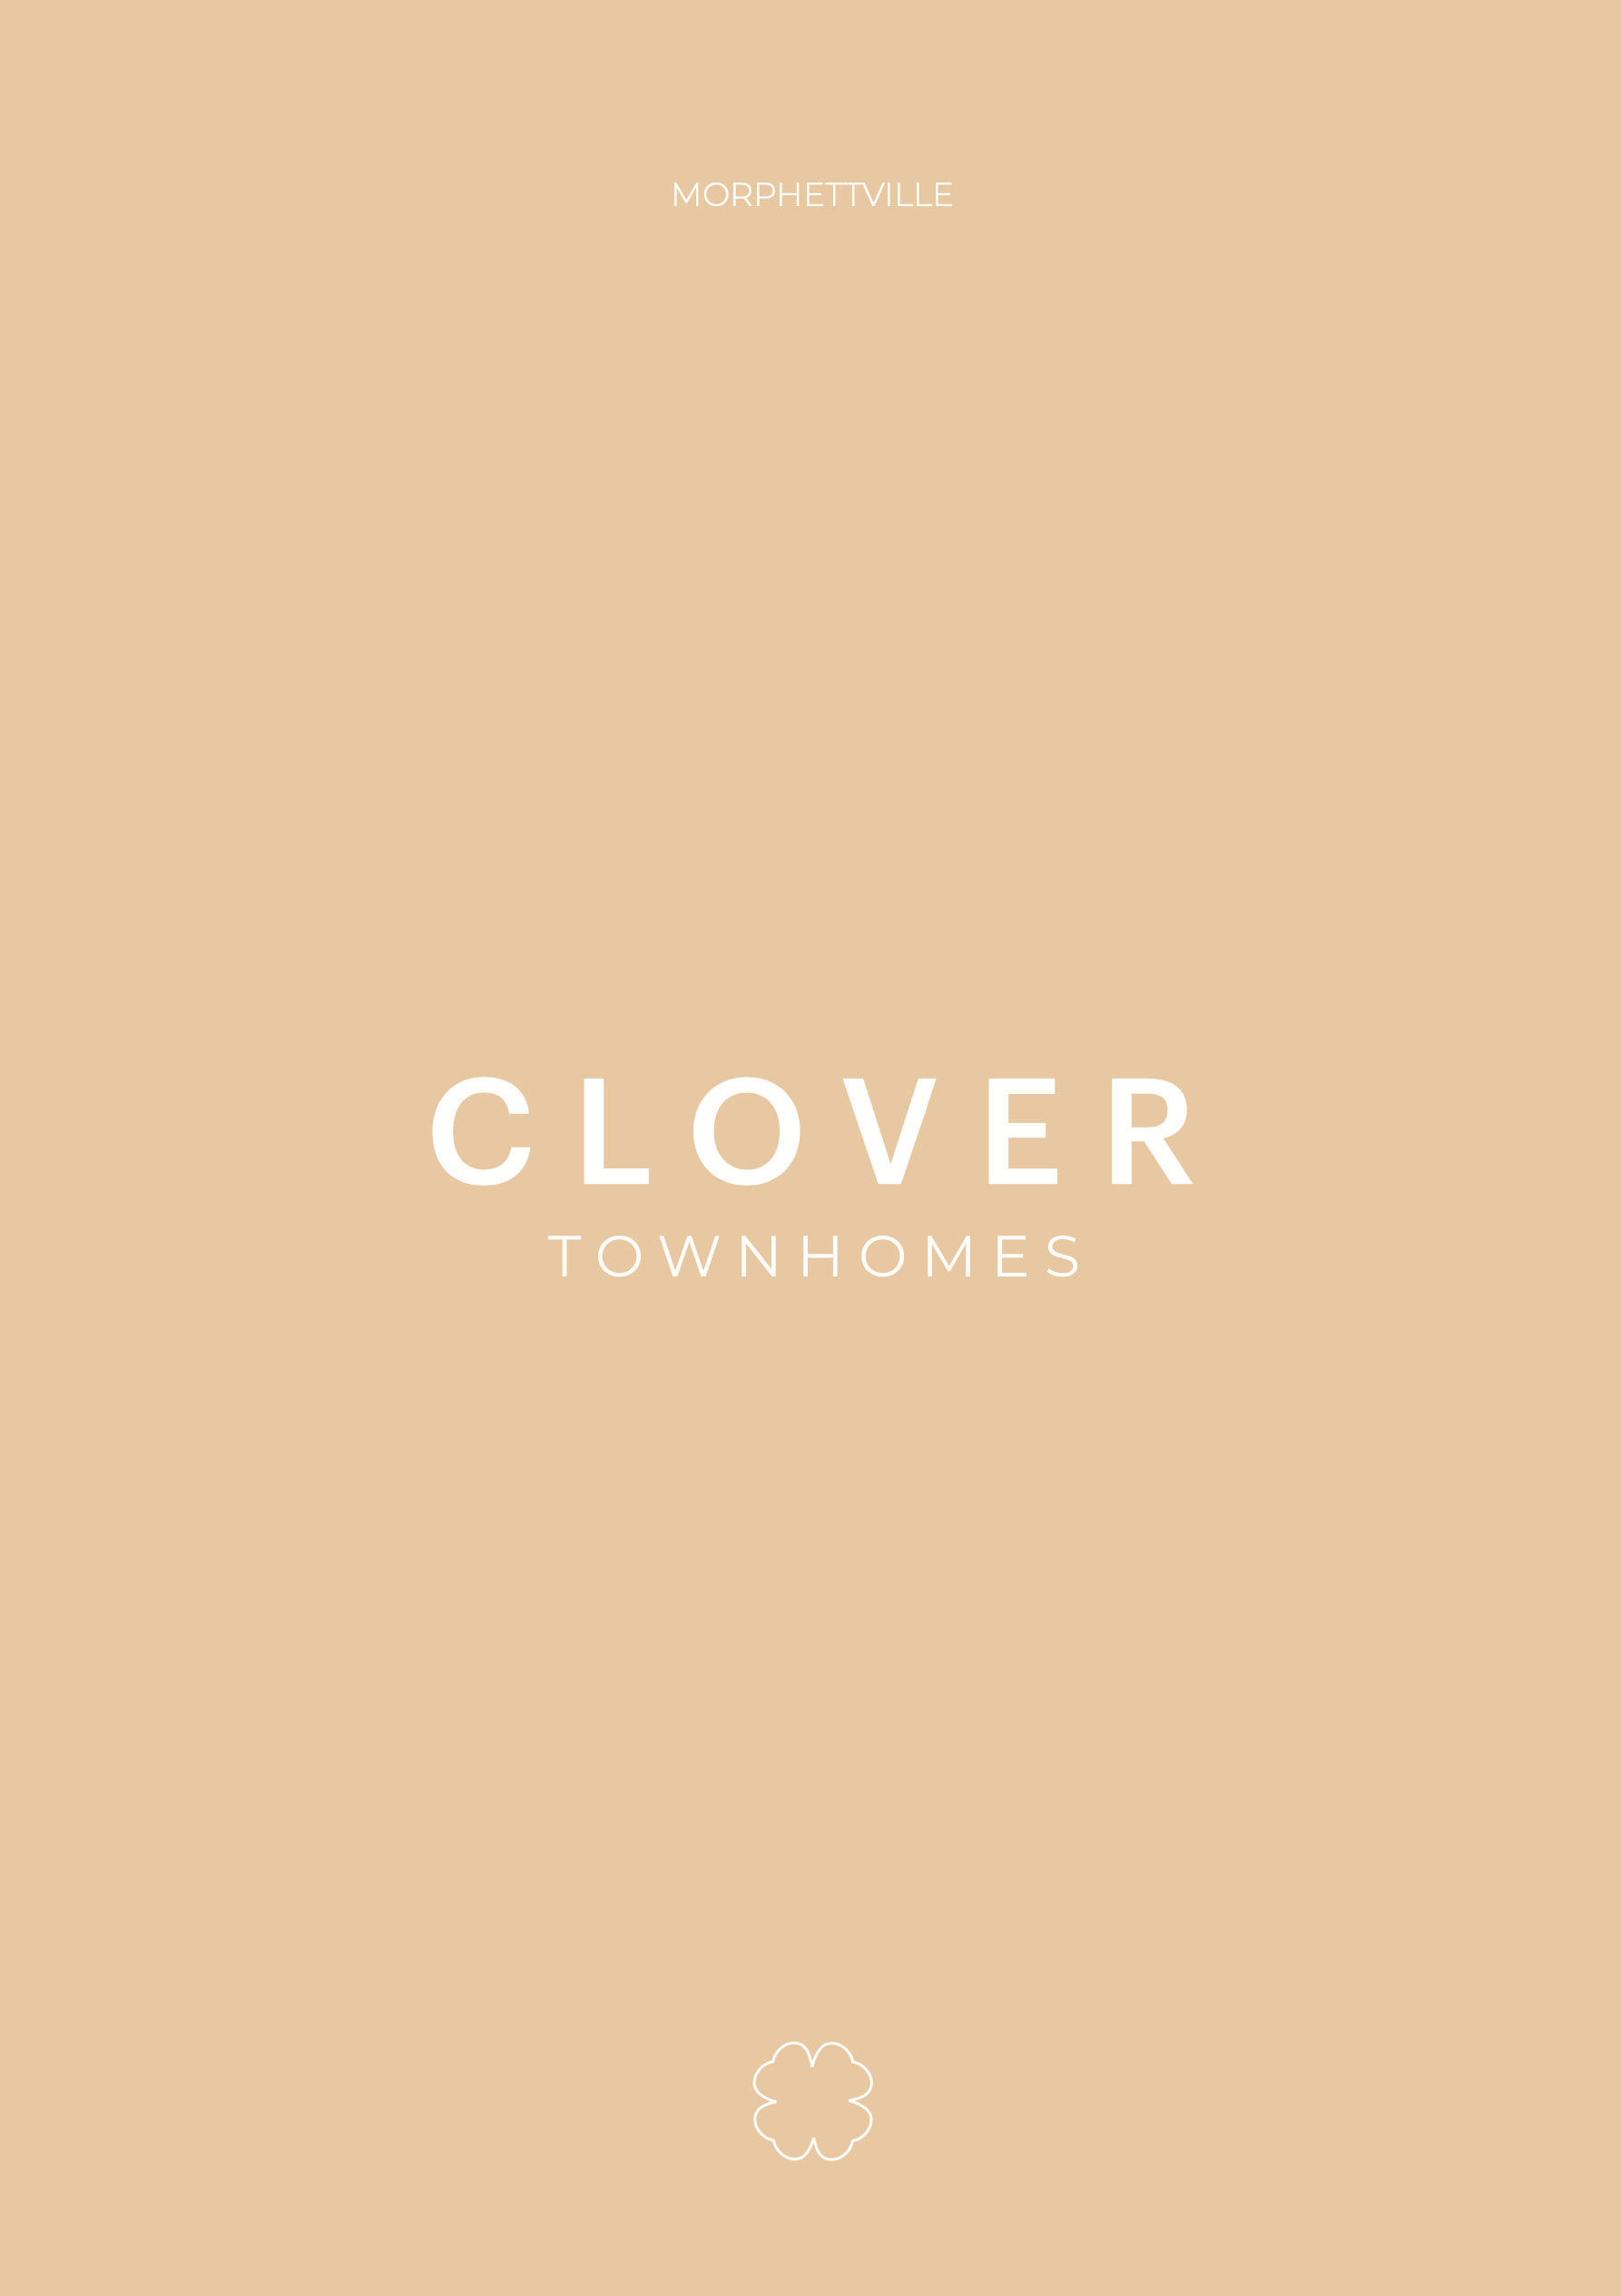 Clover Townhomes